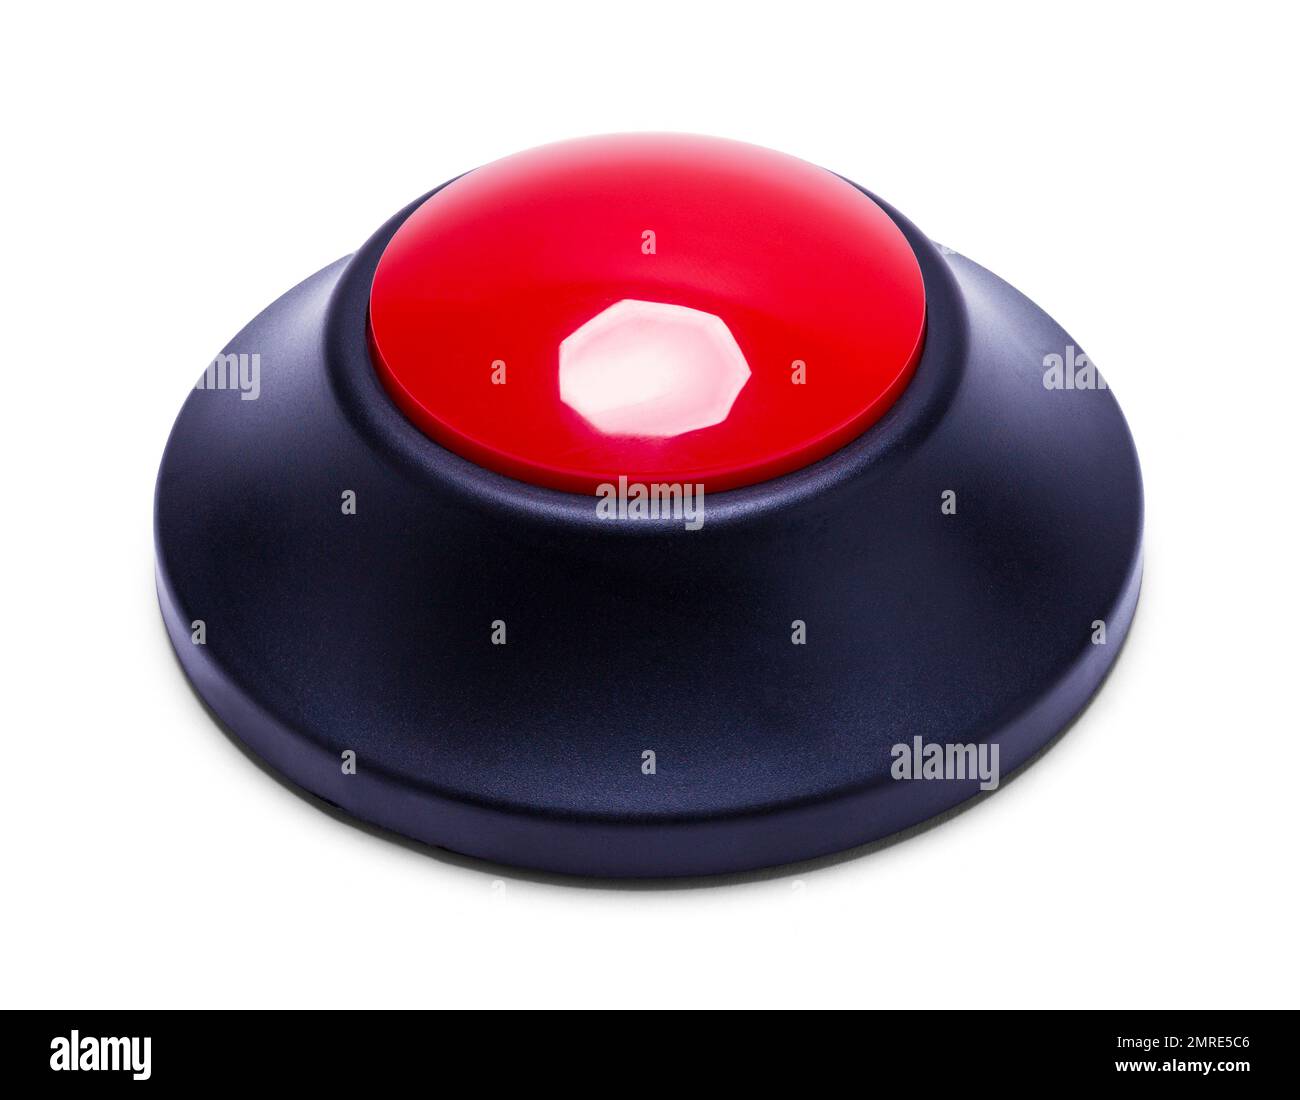 Red Push Button Cut Out on White. Stock Photo